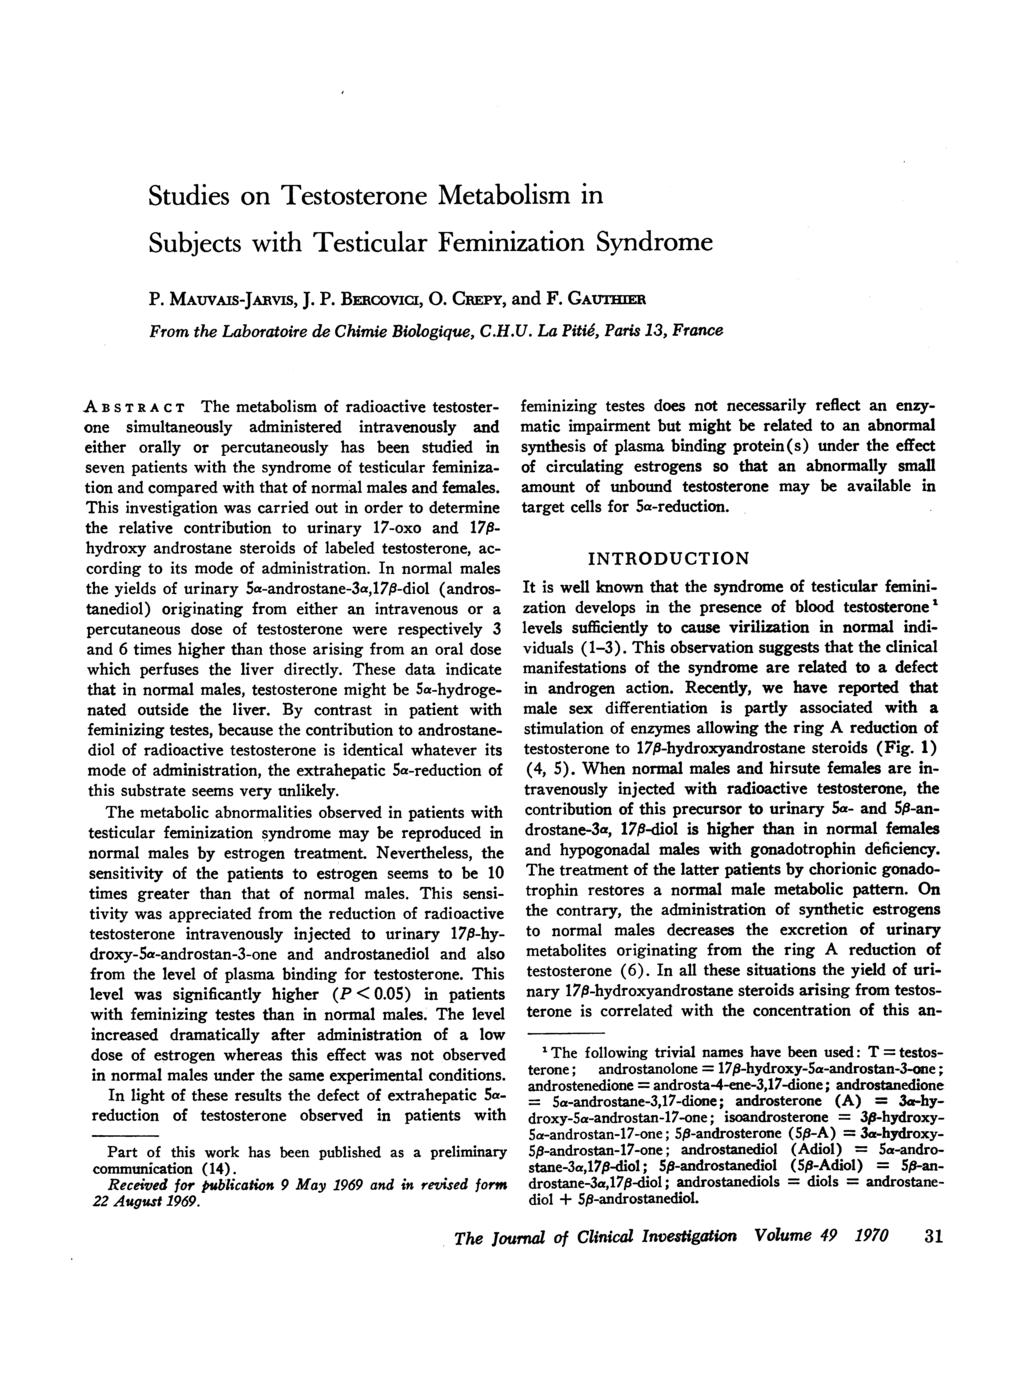 Studies on Testosterone Metabolism in Subjects with Testicular Feminization Syndrome P. MAuvAIS-JARvIs, J. P. BEmcovici, 0. CREPY, and F. GAUT